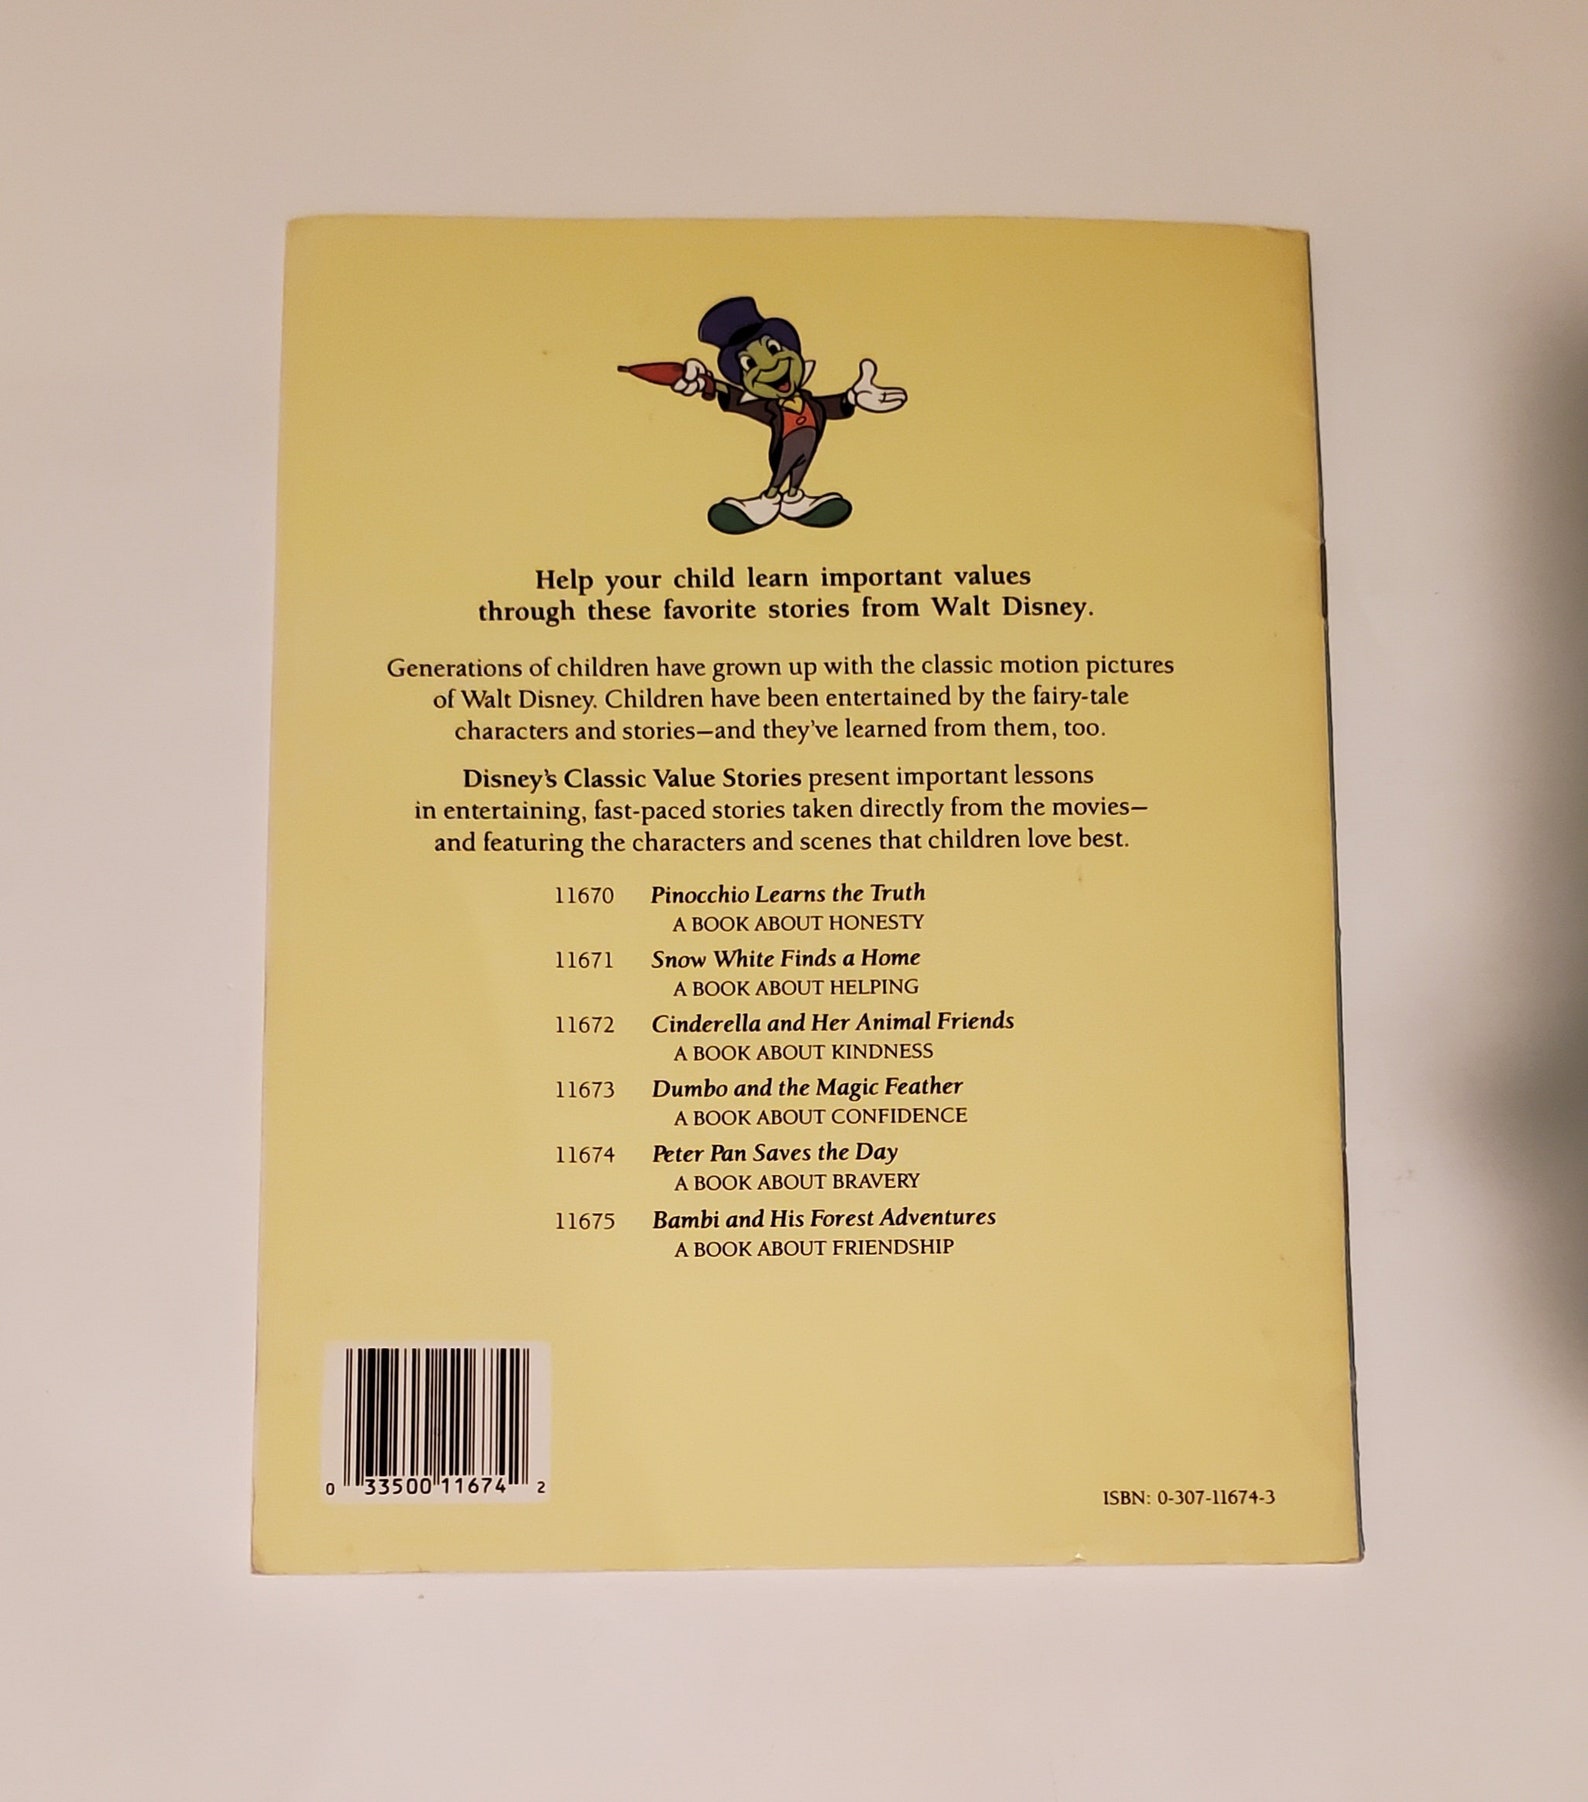 Vintage Disney Book Peter Pan Saves the Day: A Book About - Etsy